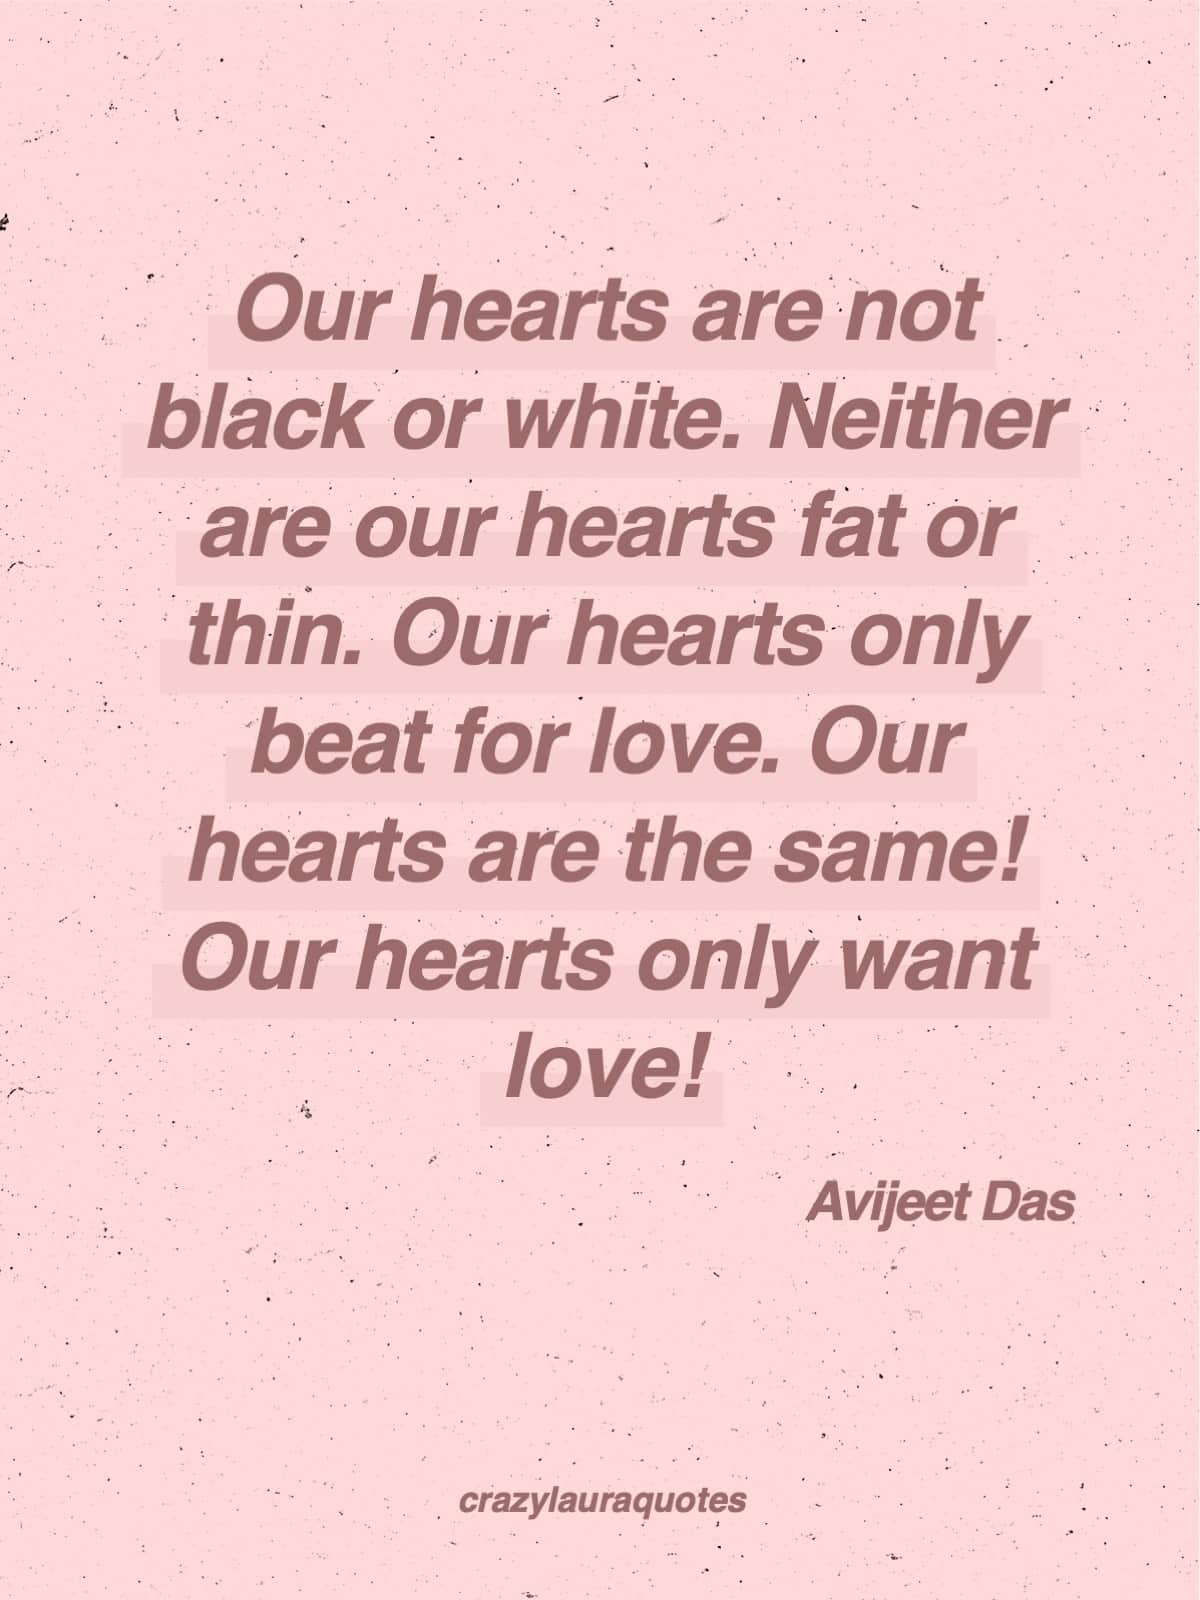 love and life inspirational quote from avijeet das